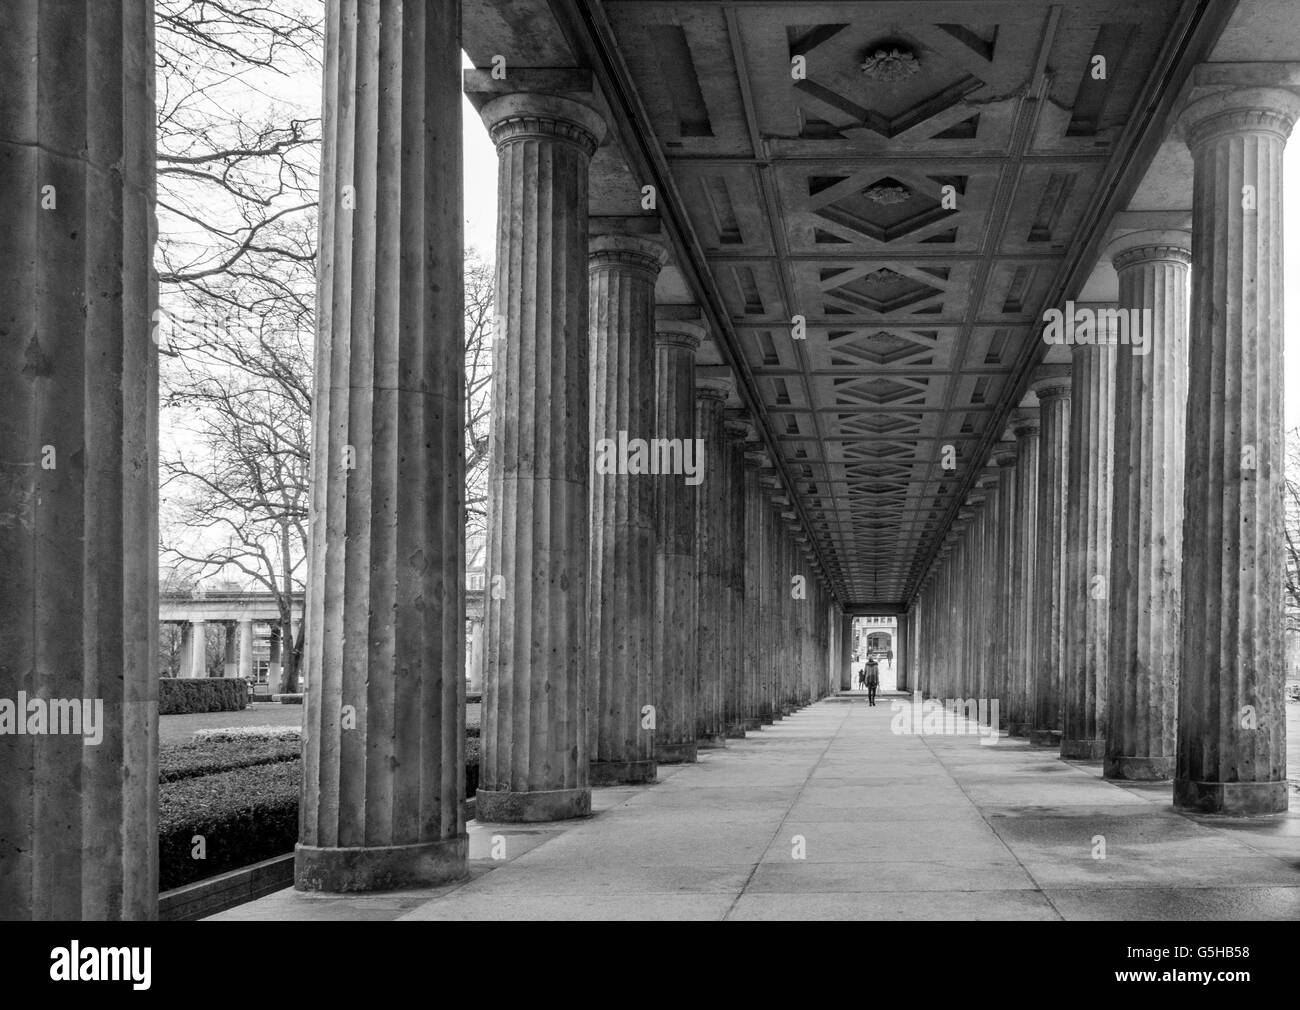 Covered walkway lined with columns on Museum Island in Berlin, Germany Stock Photo